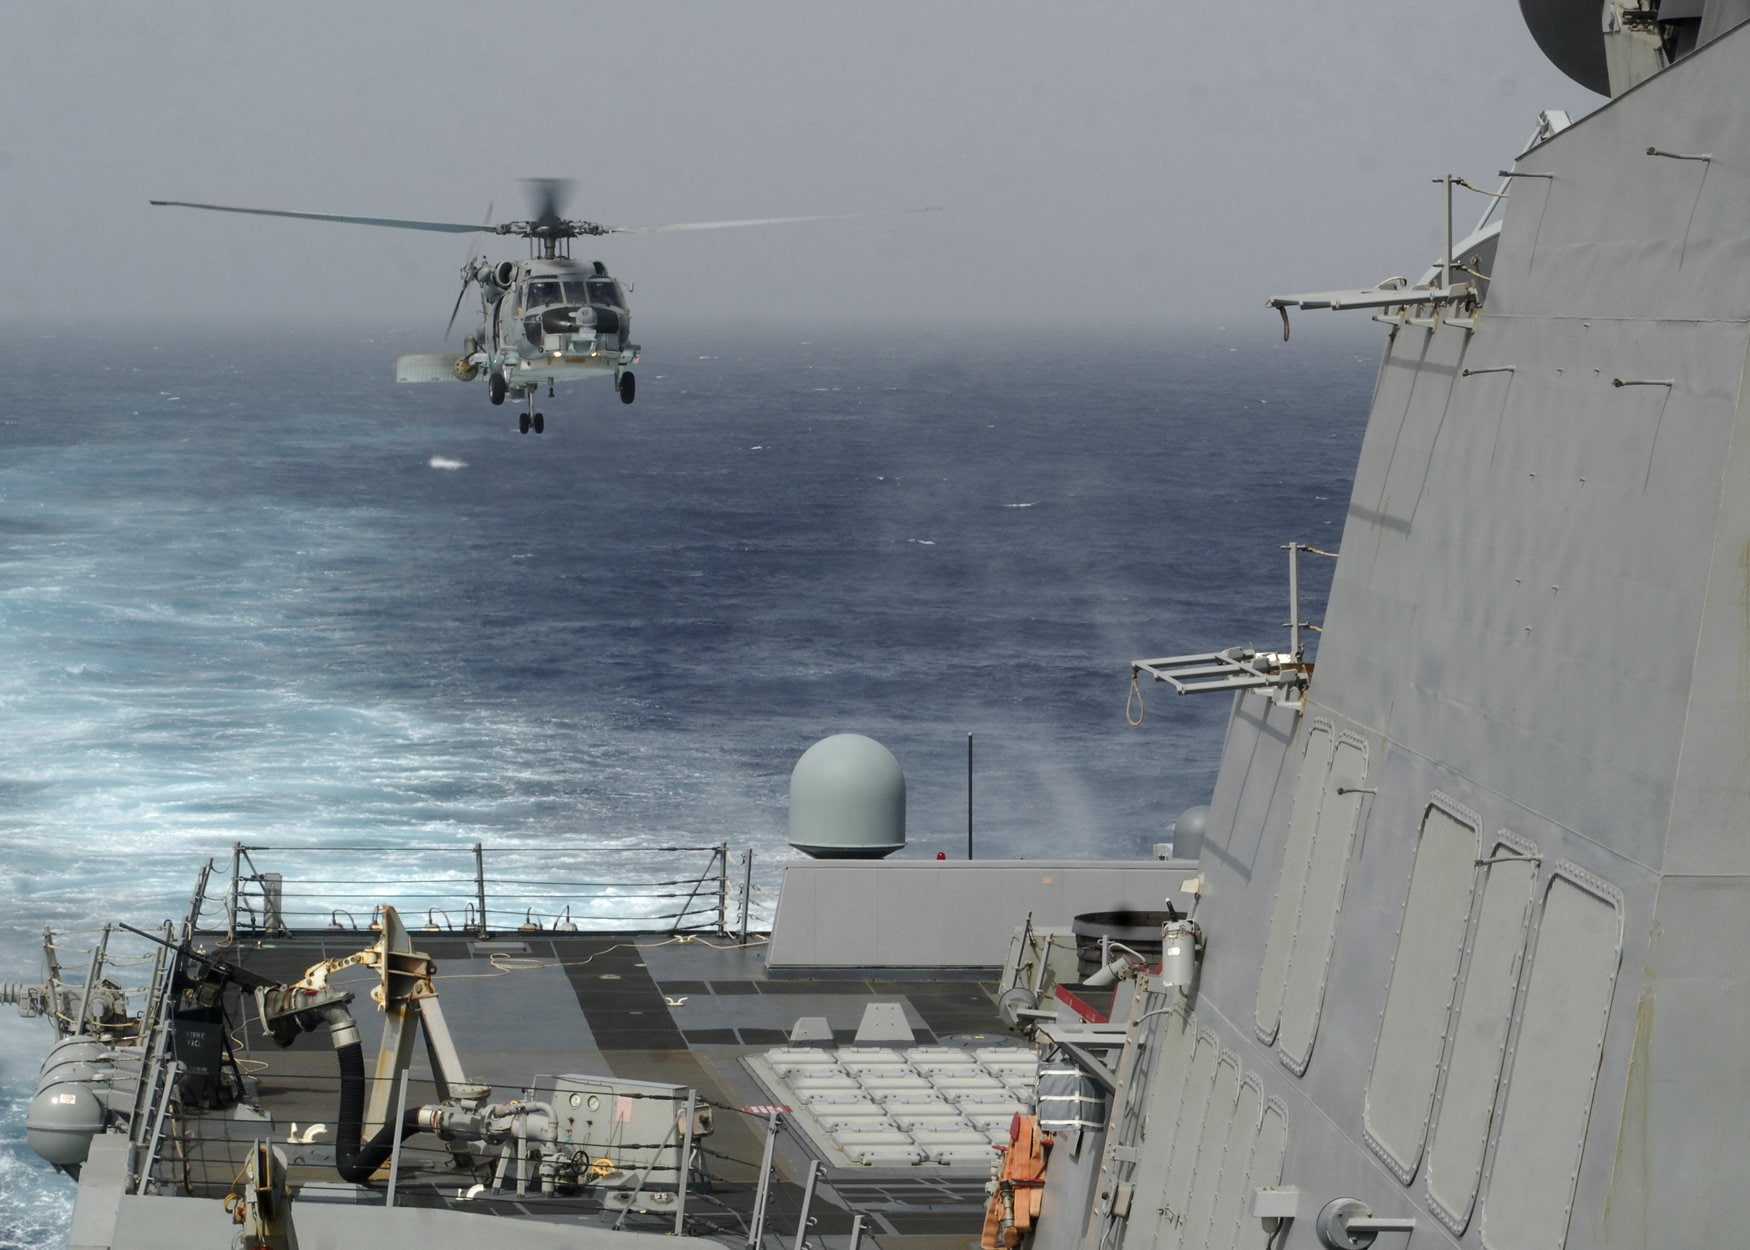 Military Helicopters, Sikorsky SH-60 Seahawk, Aircraft, Guided Missile Destroyer